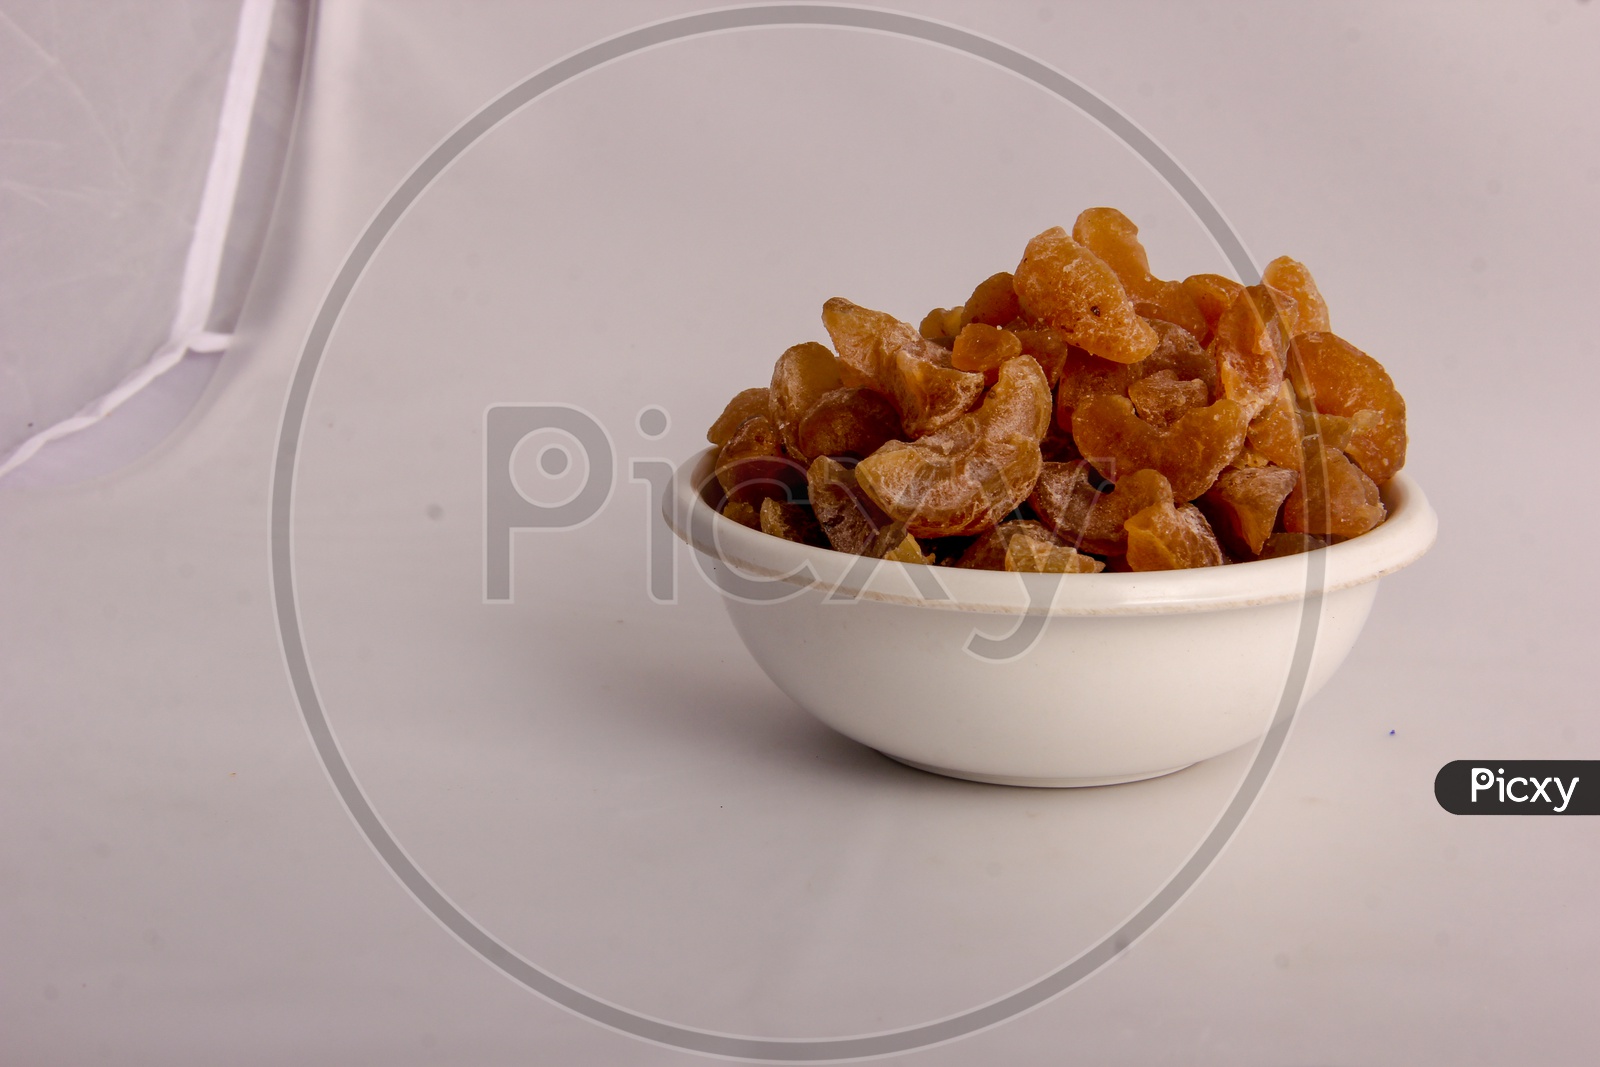 Dry Gooseberry in a Bowl On an Isolated White Background